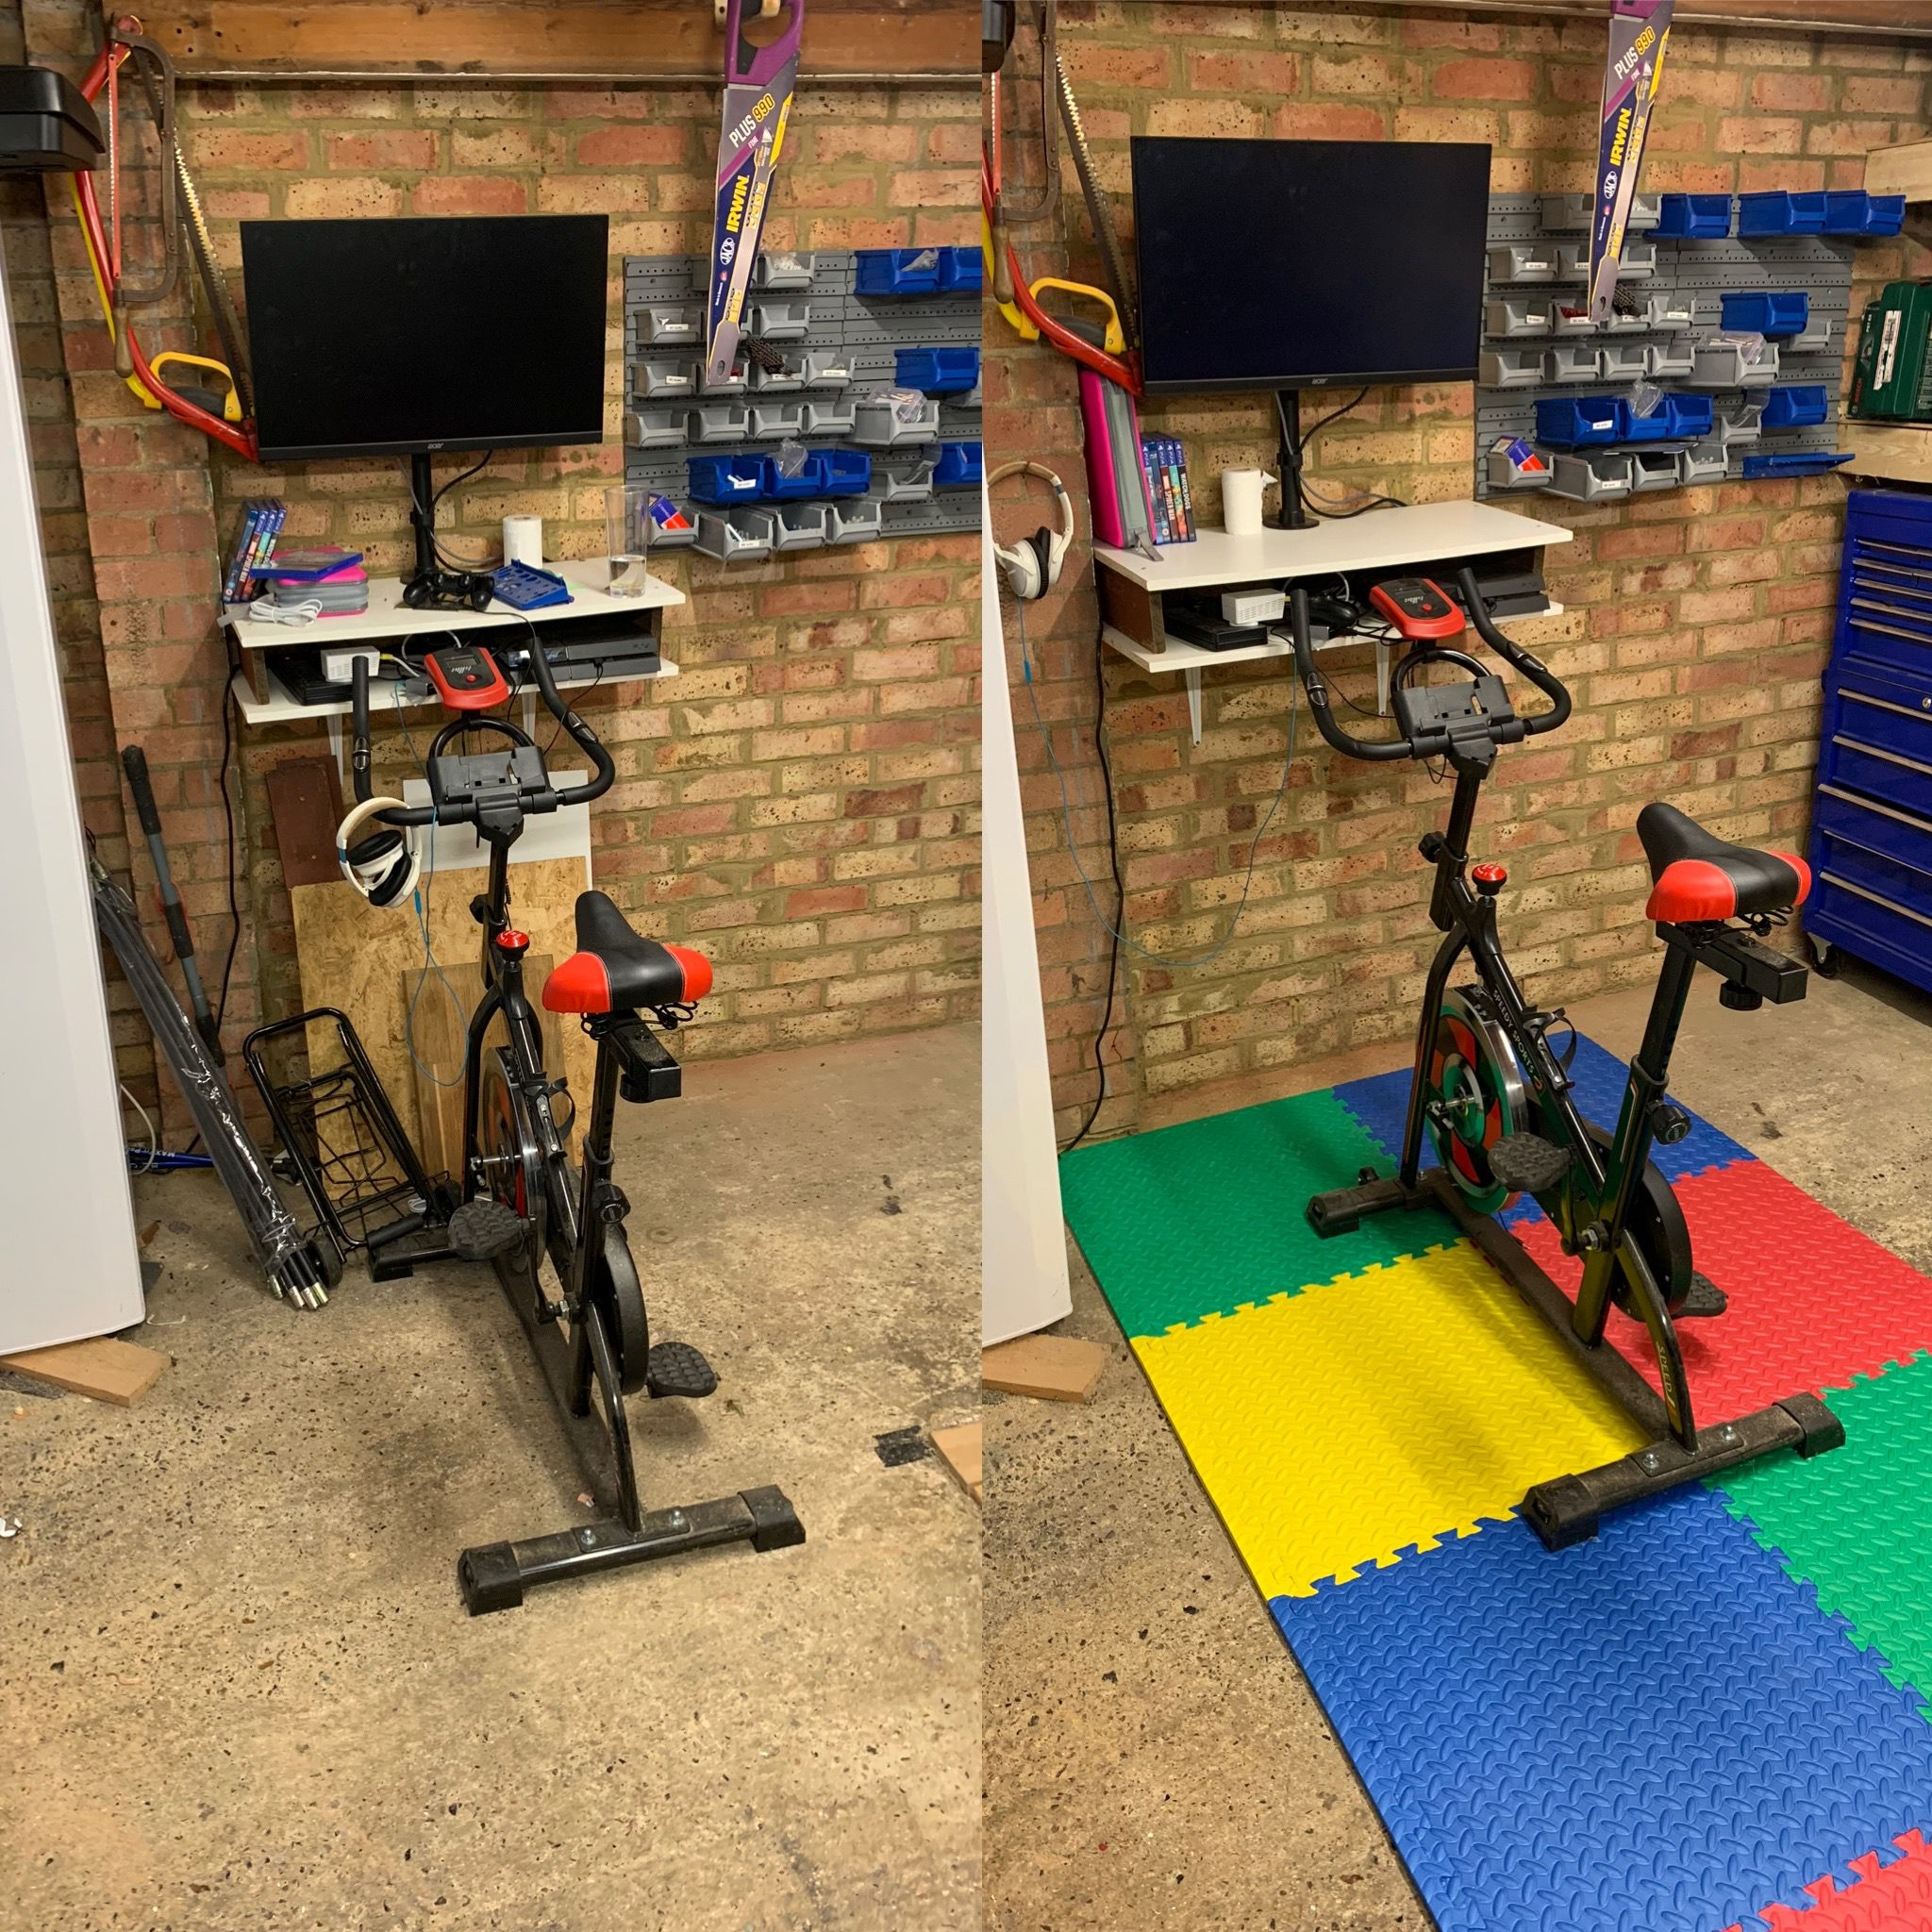 A before and after shot of bike and mats